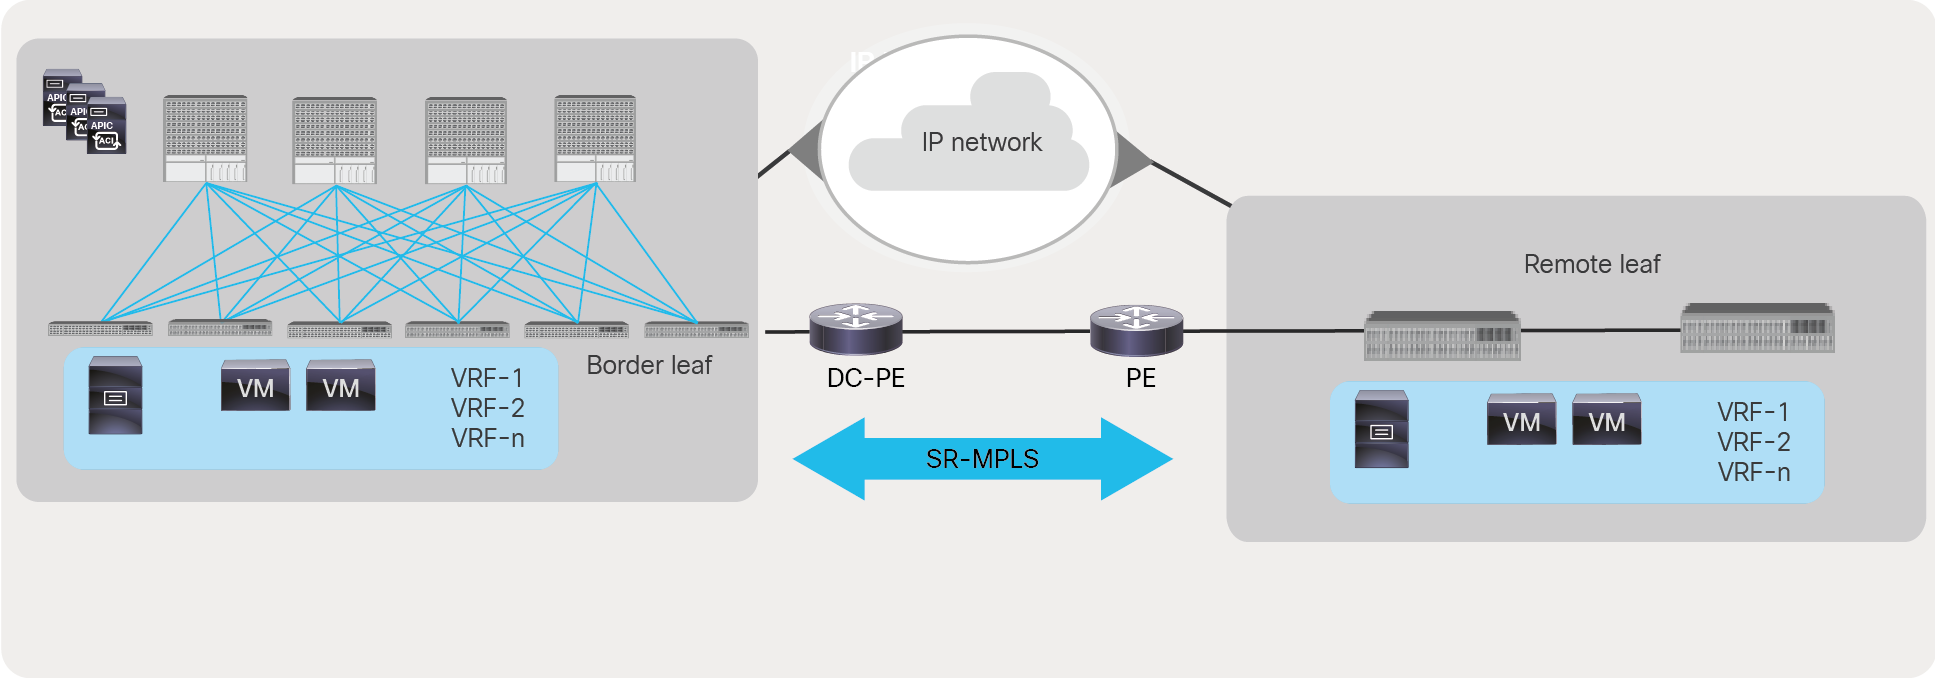 Data center to data center traffic flow monitoring with SR/MPLS handoff